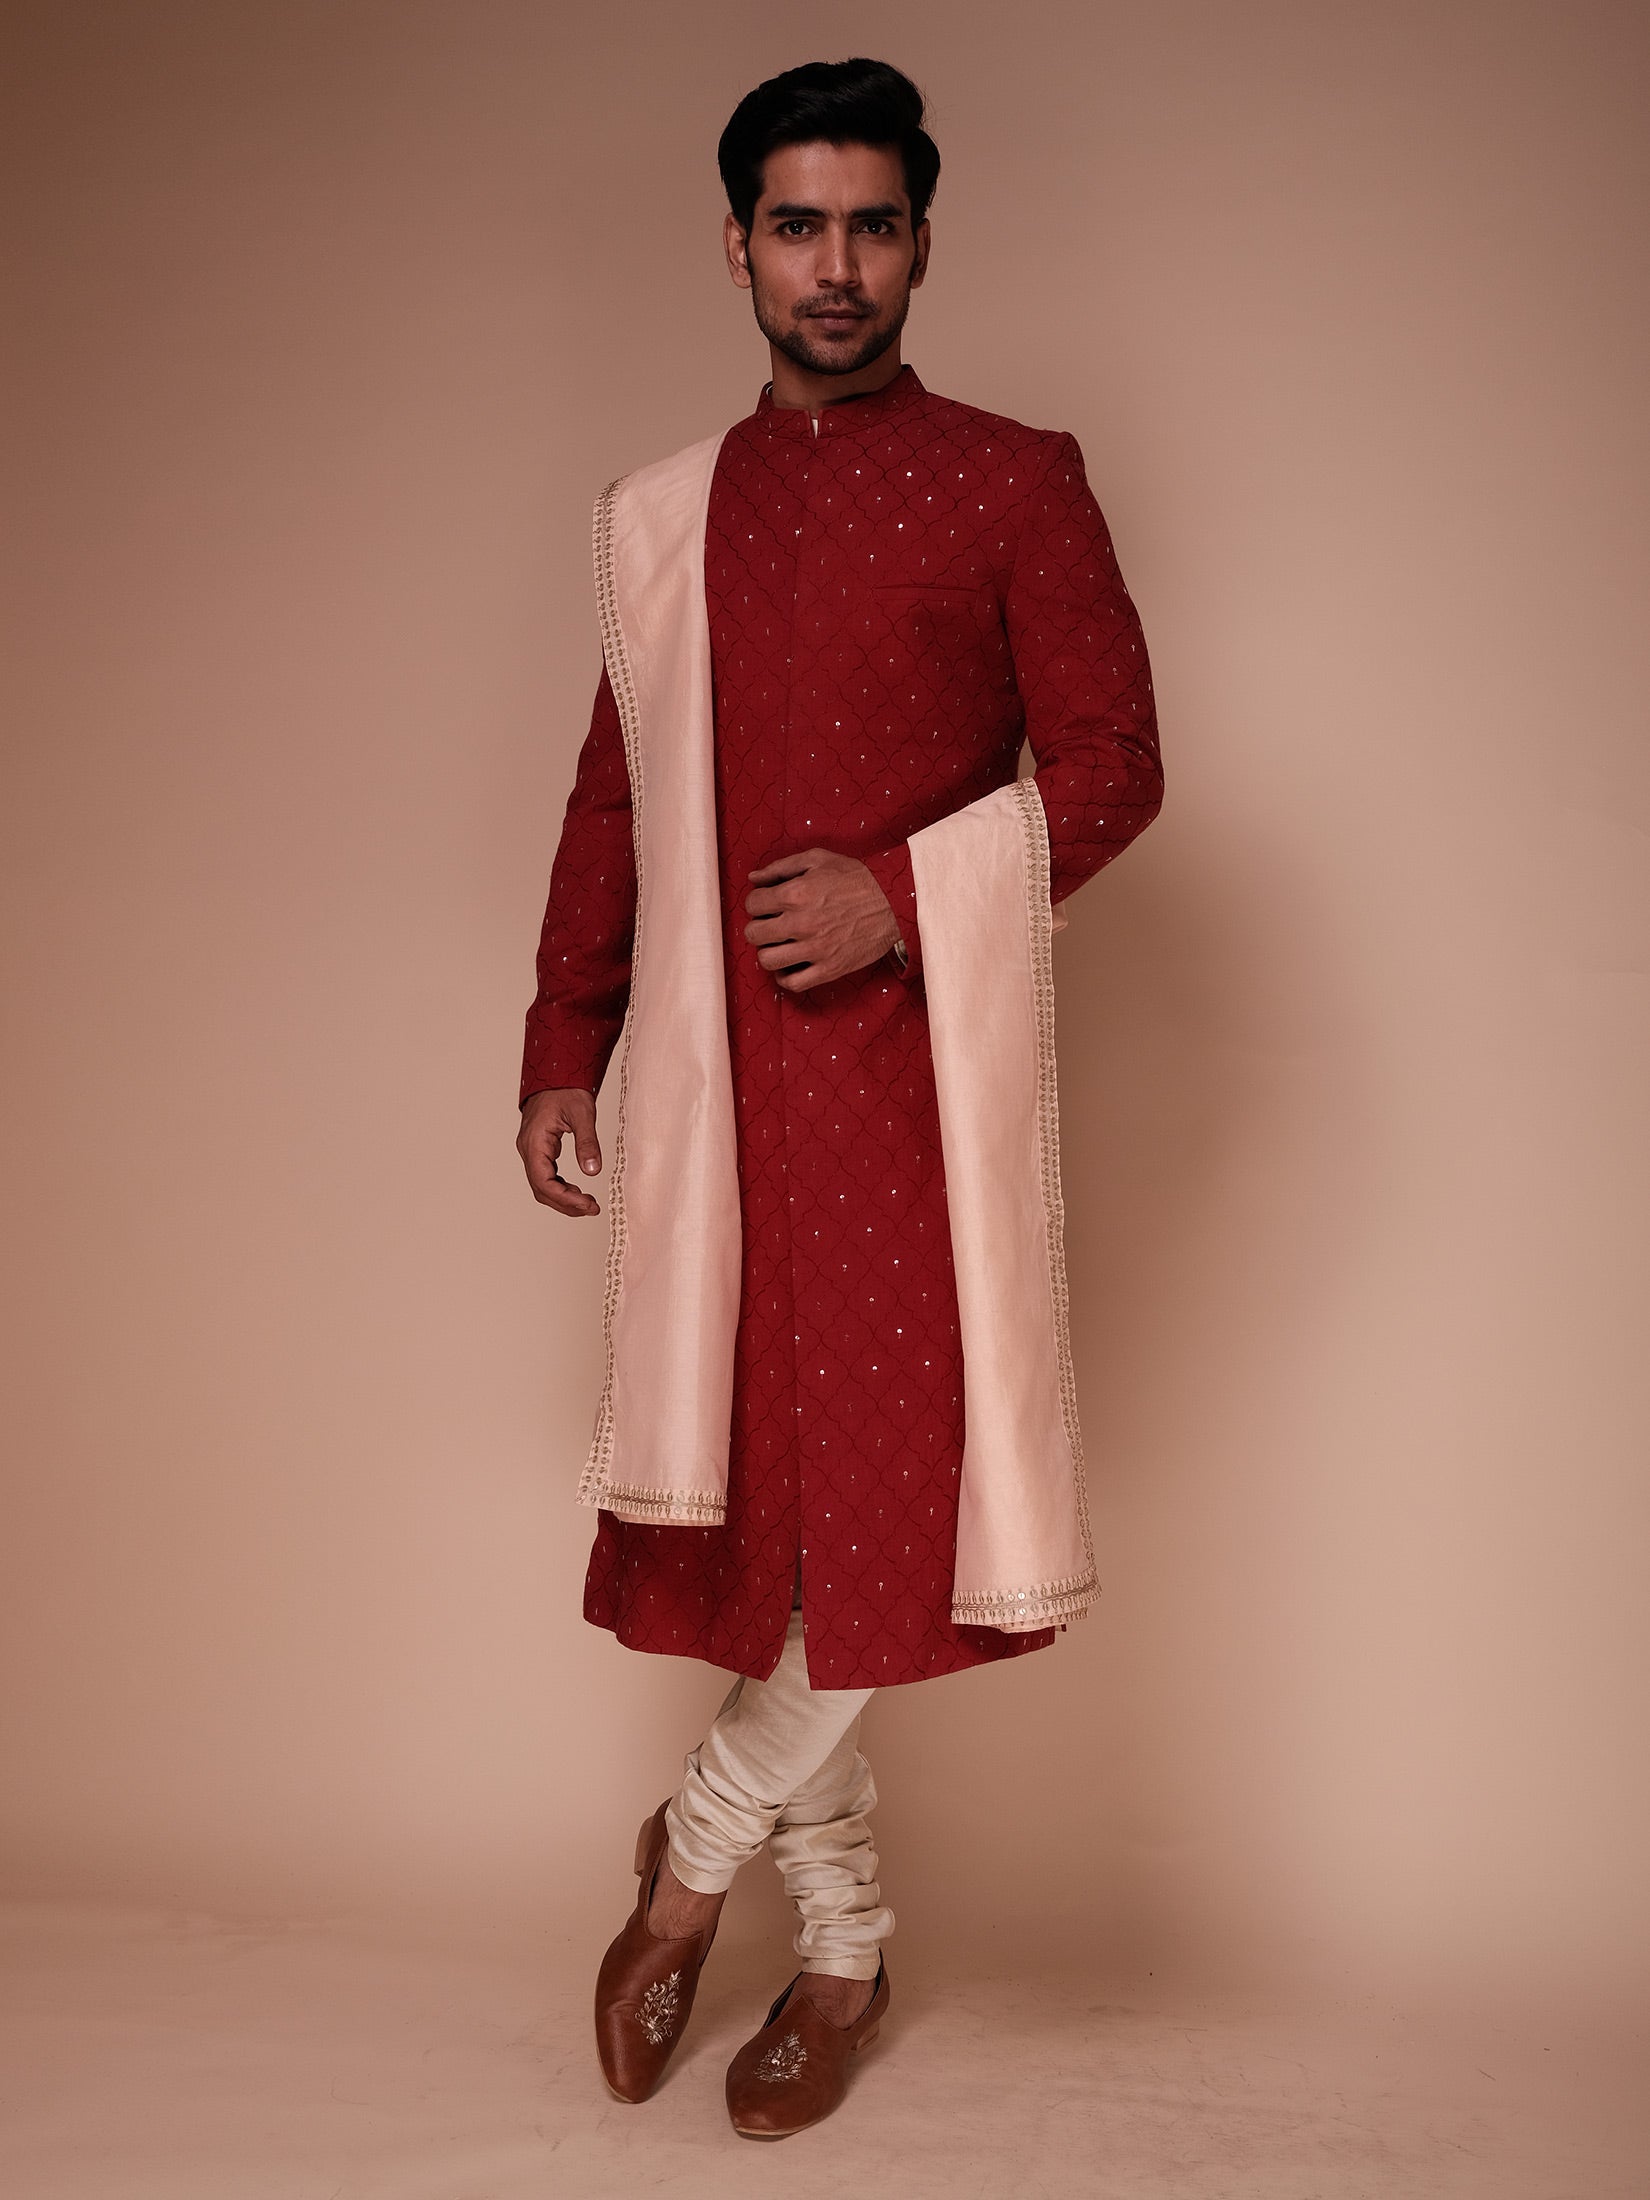 Deep Red Sherwani With Embroidered Structure Jaal And Fine Aspen Motifs Paired With Kurta,  Churidar And Dupatta